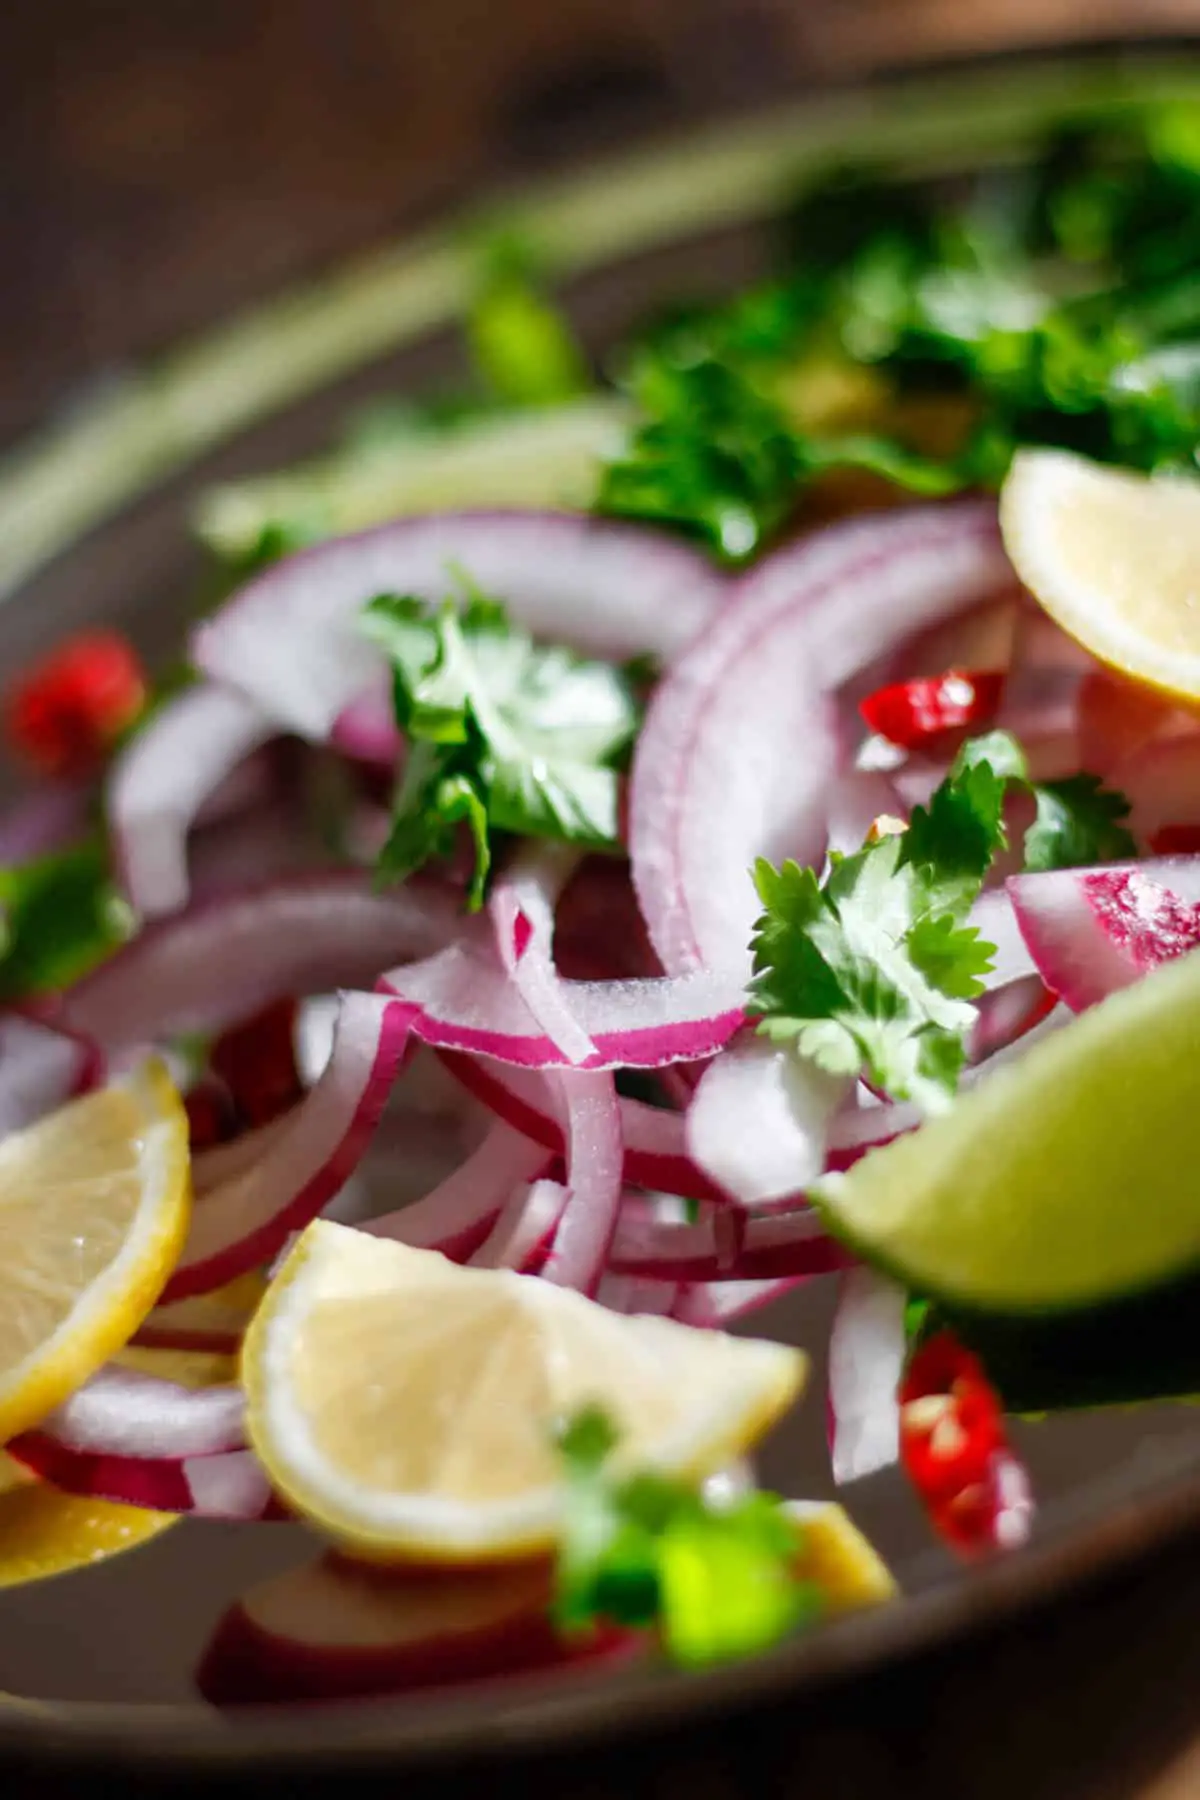 Sliced red onions, wedges of lime and lemons, sliced red chilies and cilantro on a silver plate.